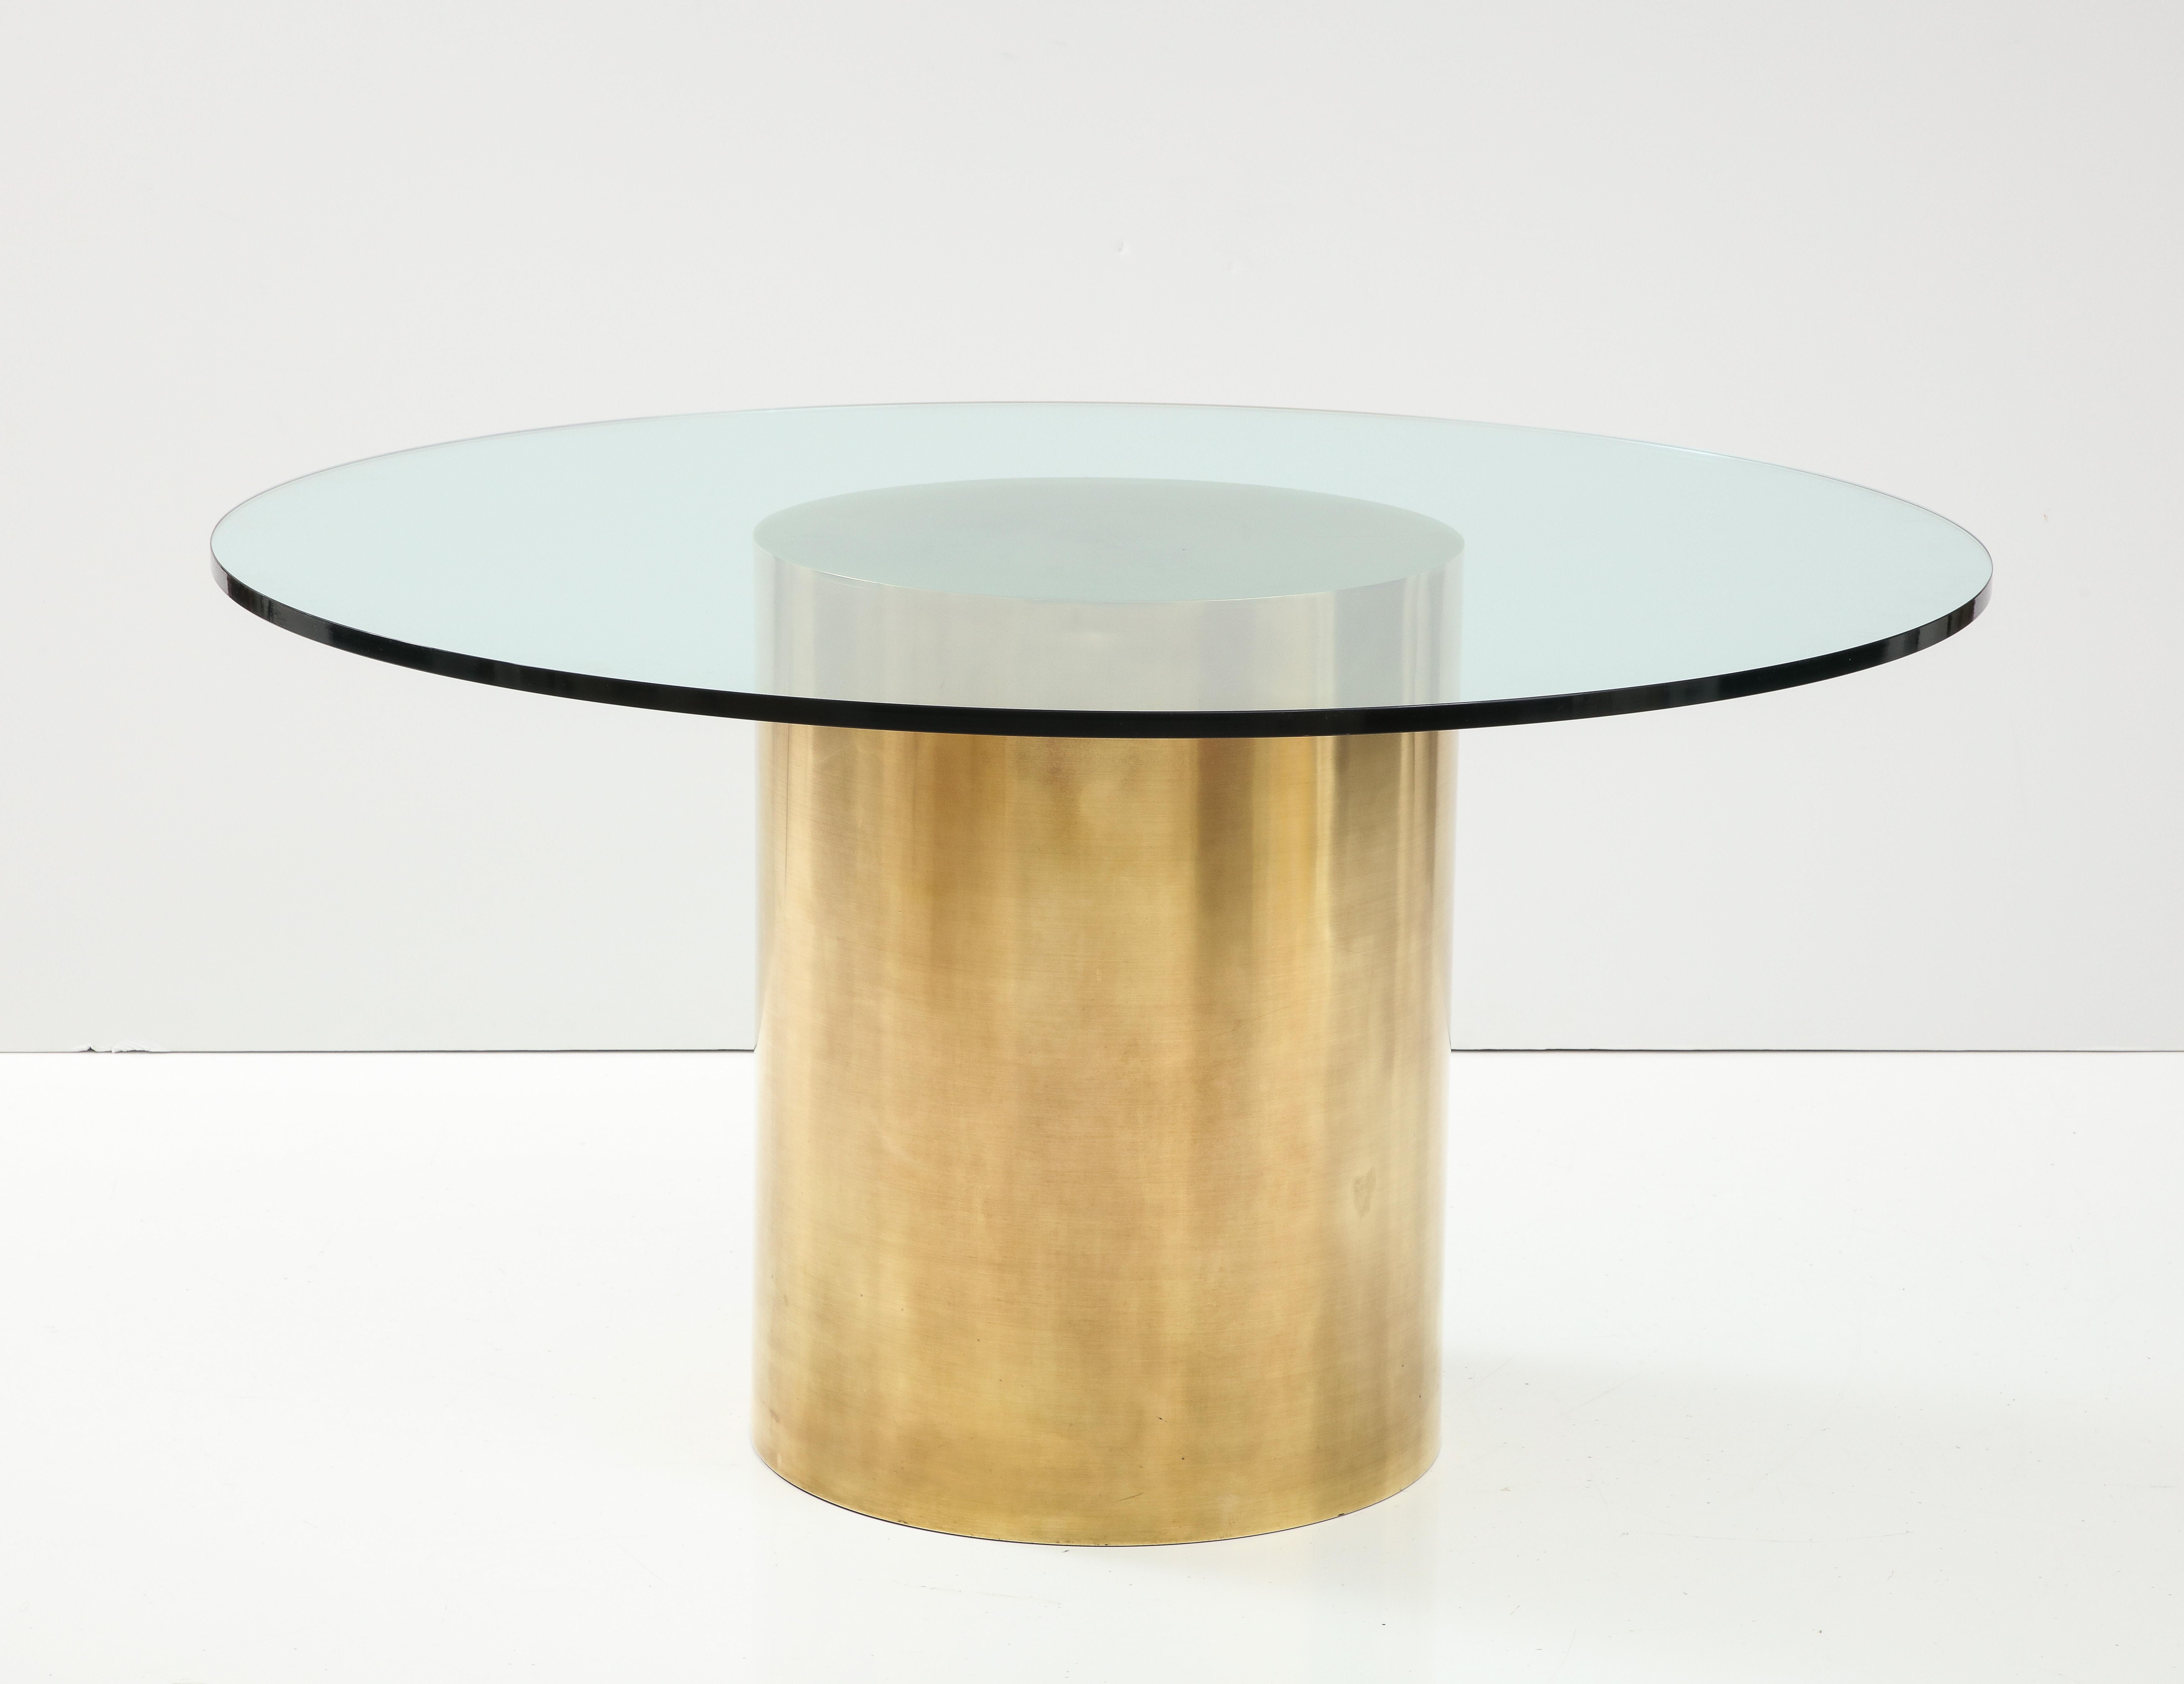 1970's Mid-Century Modern Brass Drum Dining Table Attributed To Brueton In Good Condition For Sale In New York, NY